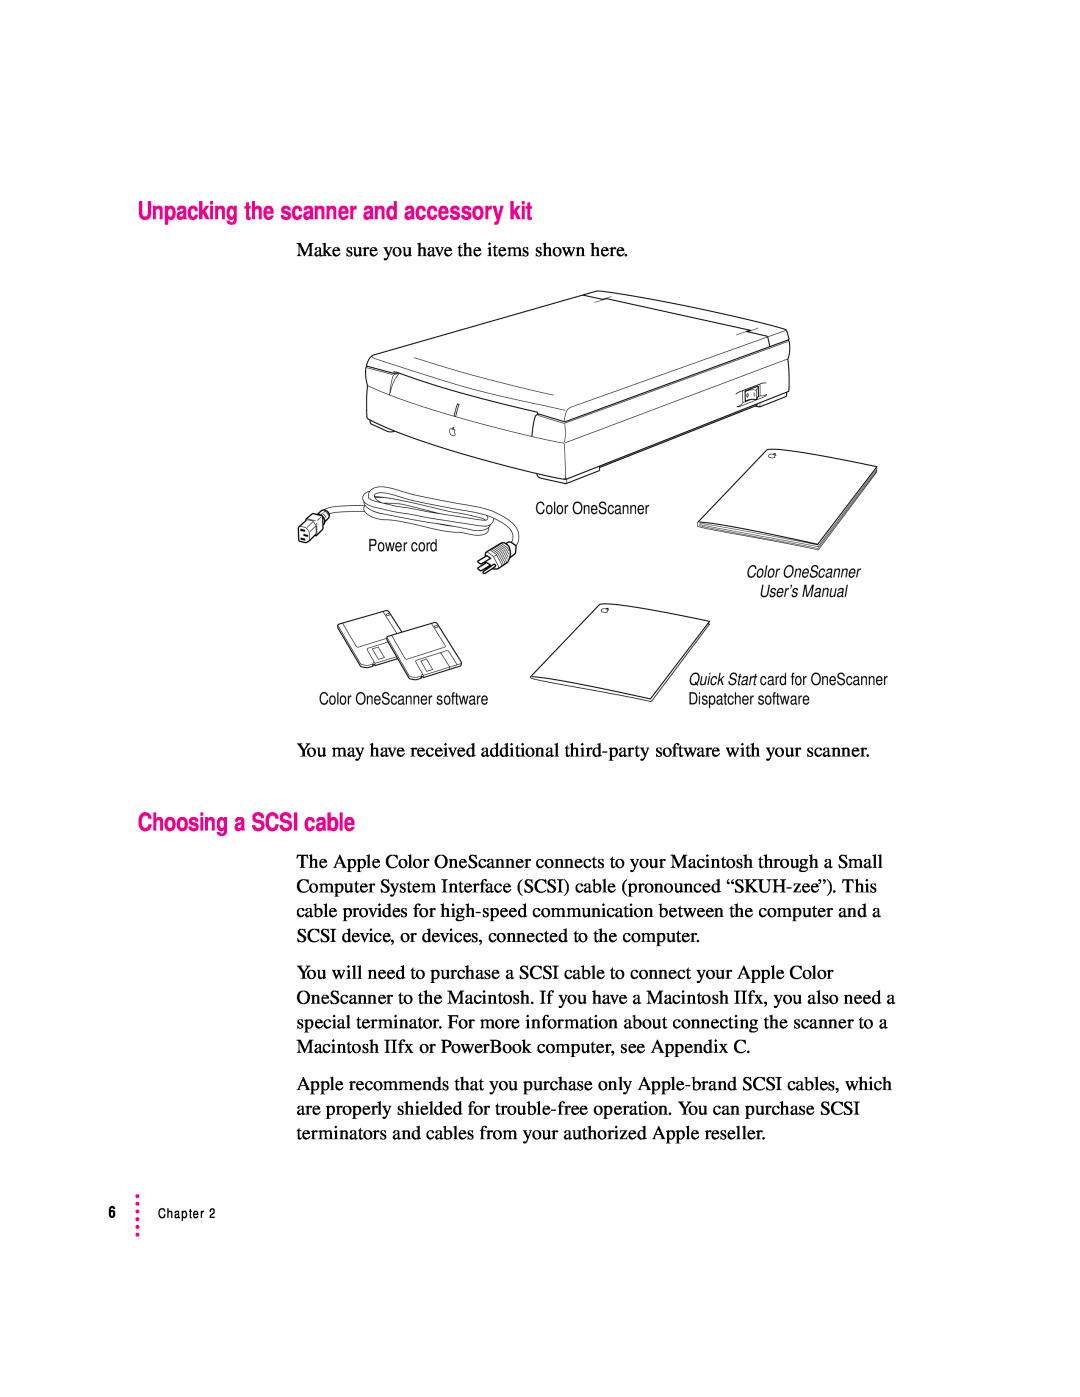 Apple 627, 1230 user manual Unpacking the scanner and accessory kit, Choosing a SCSI cable 